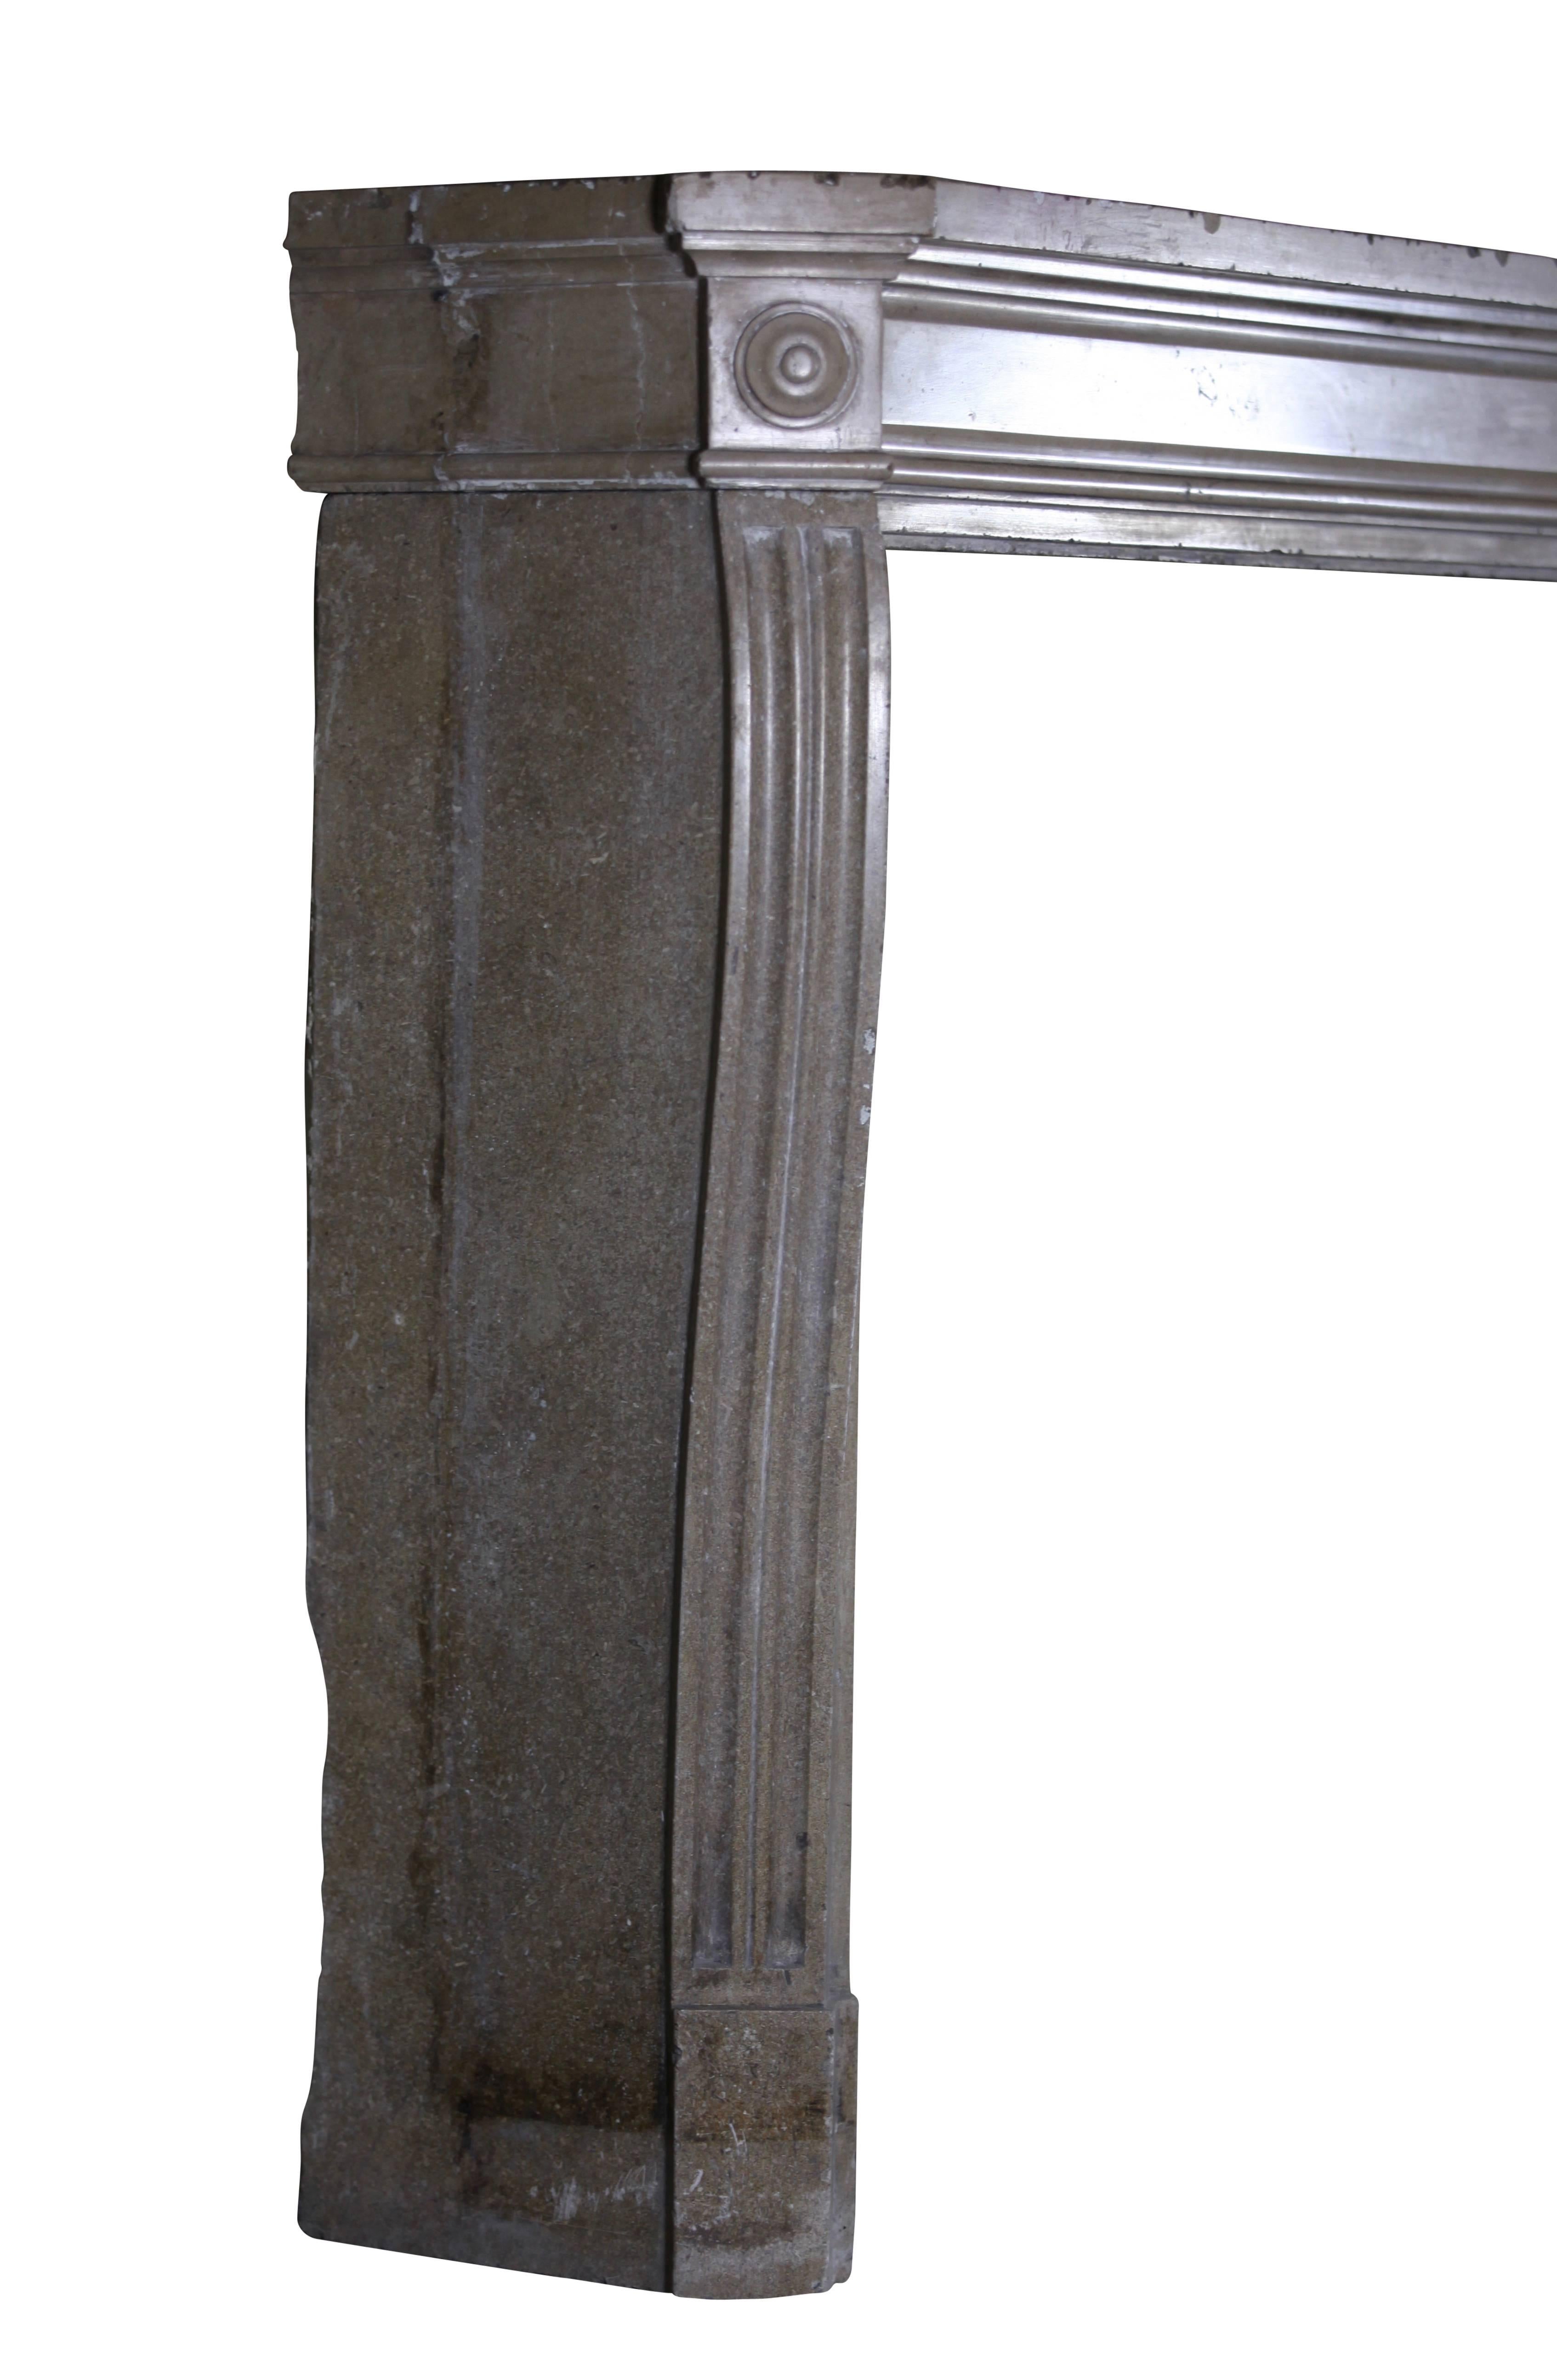 This is a beautiful antique fireplace surround in beige hard stone with bulls eye Has the looks of a marble one. It is perfect for a minimal timeless interior. 
Measures: 
142 cm EW 55.91